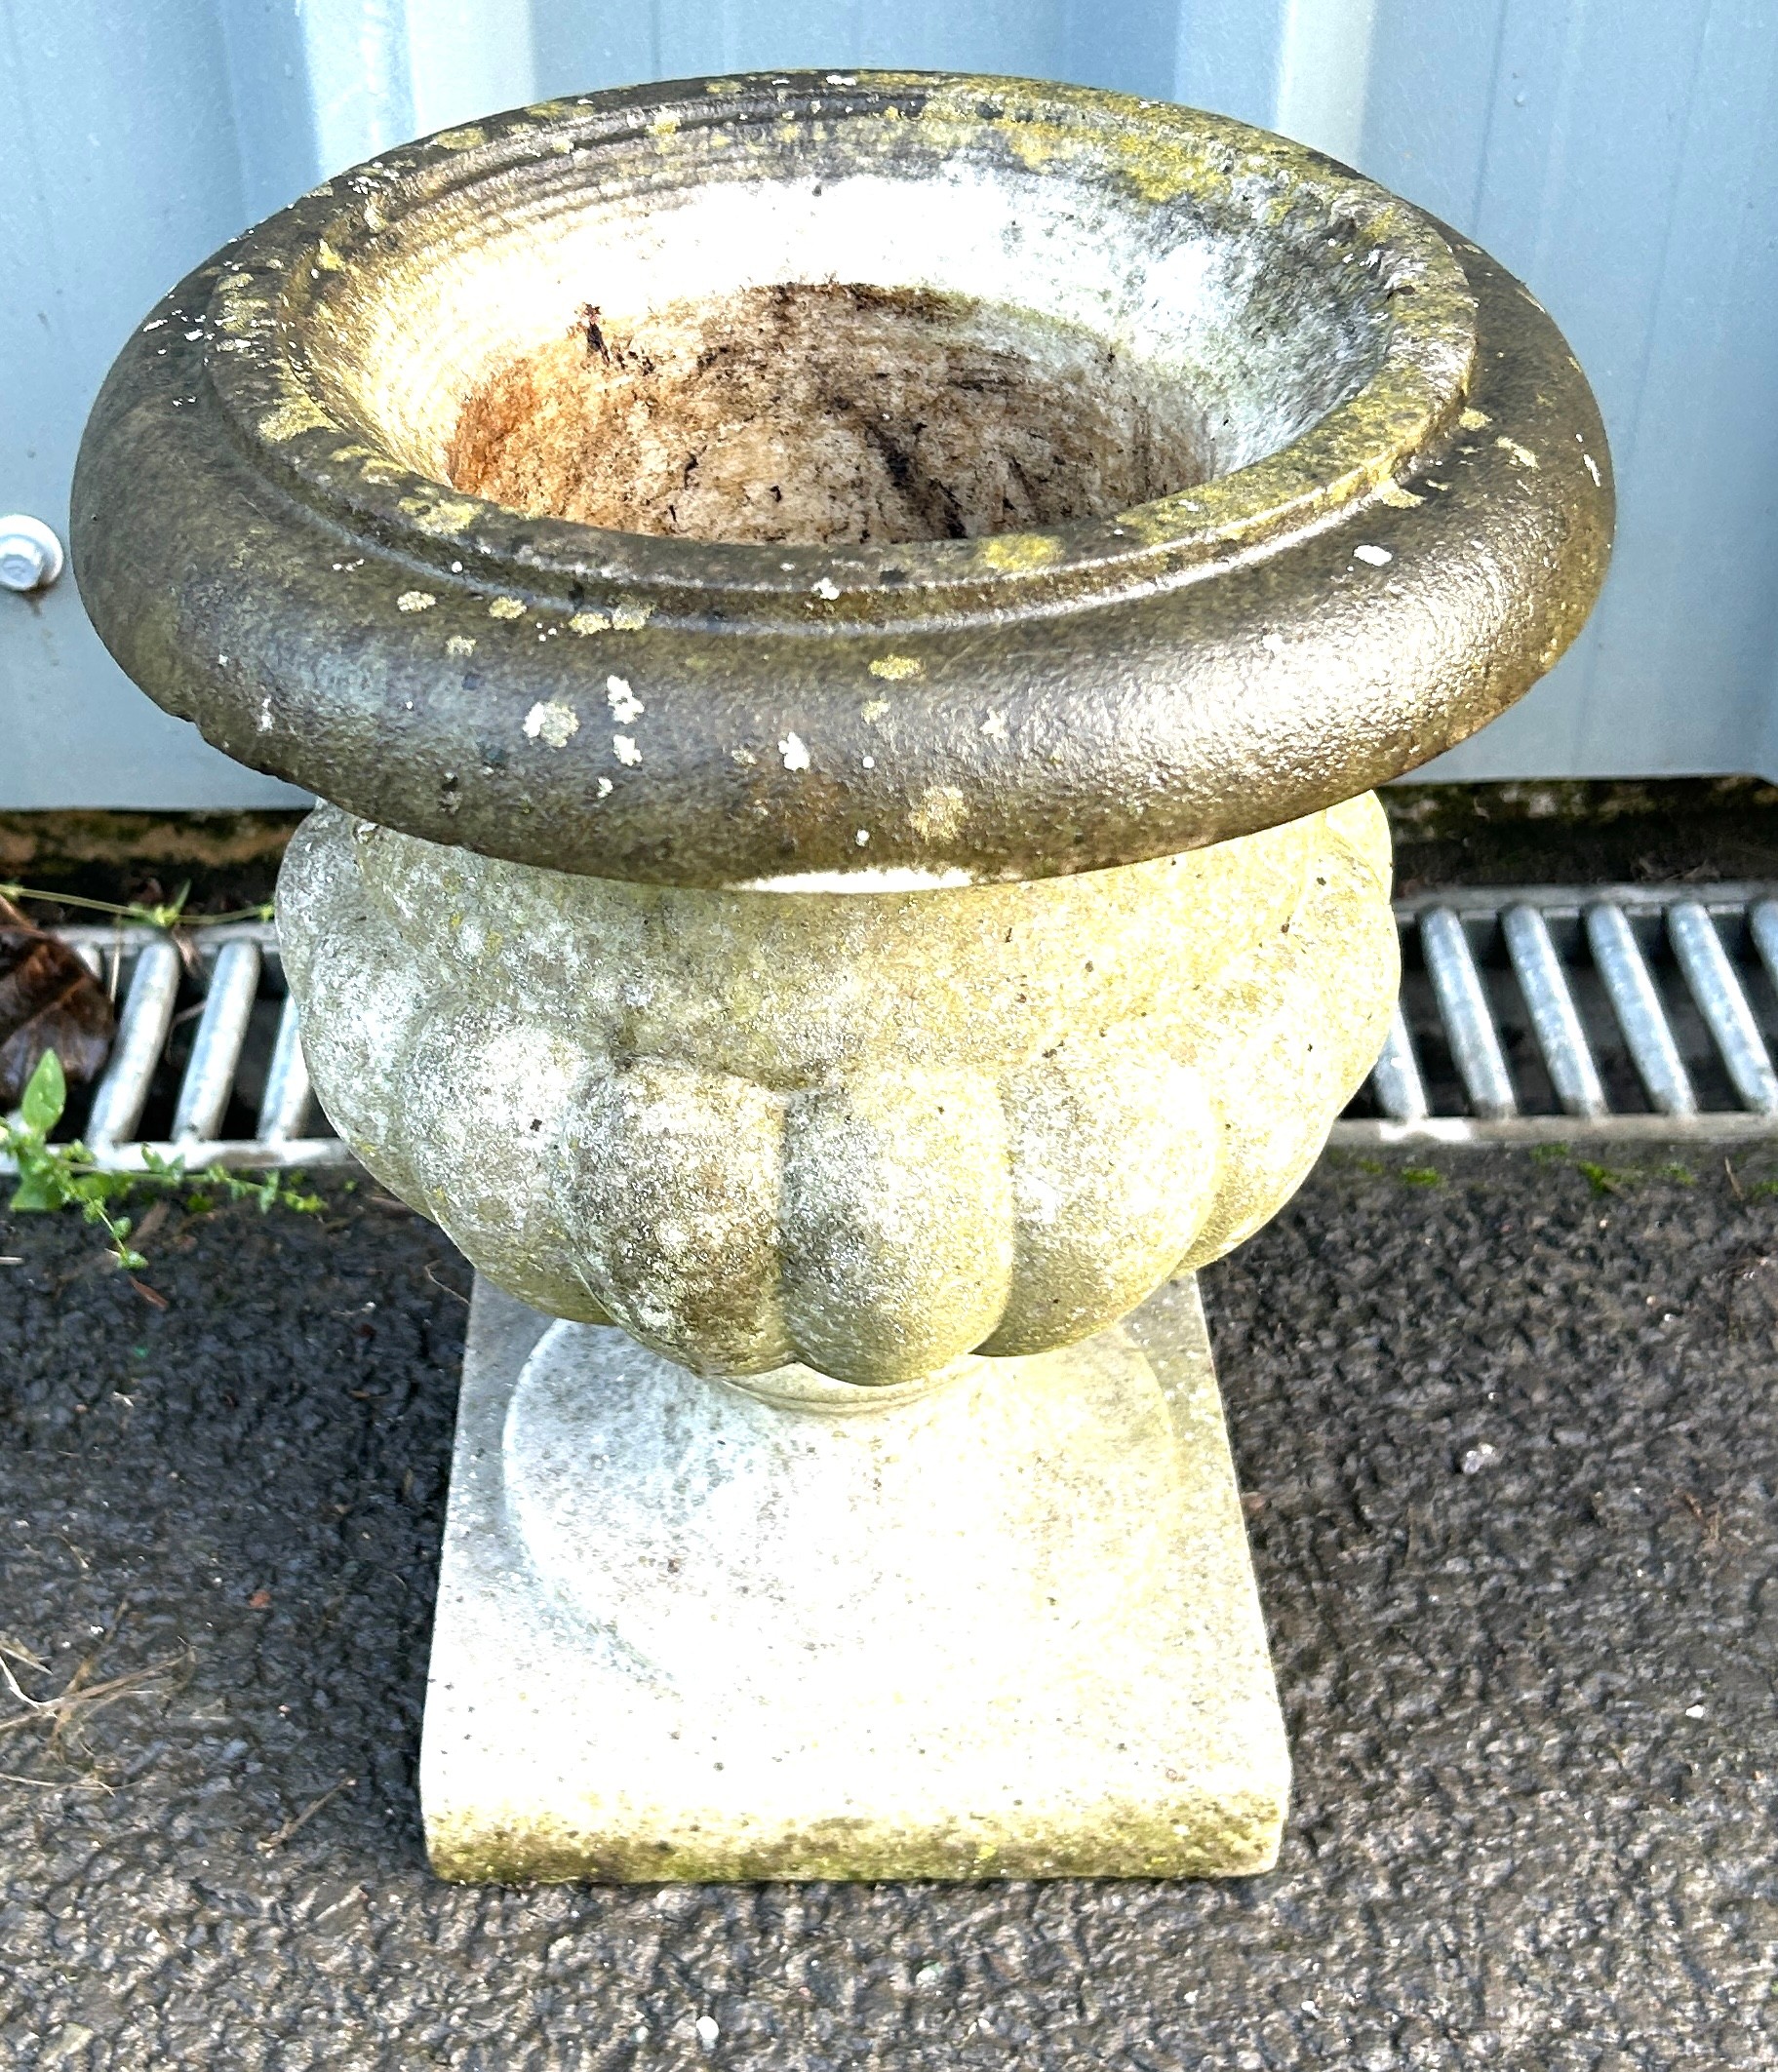 Marble planter measures approx 12 inches tall by 10 inches diameter